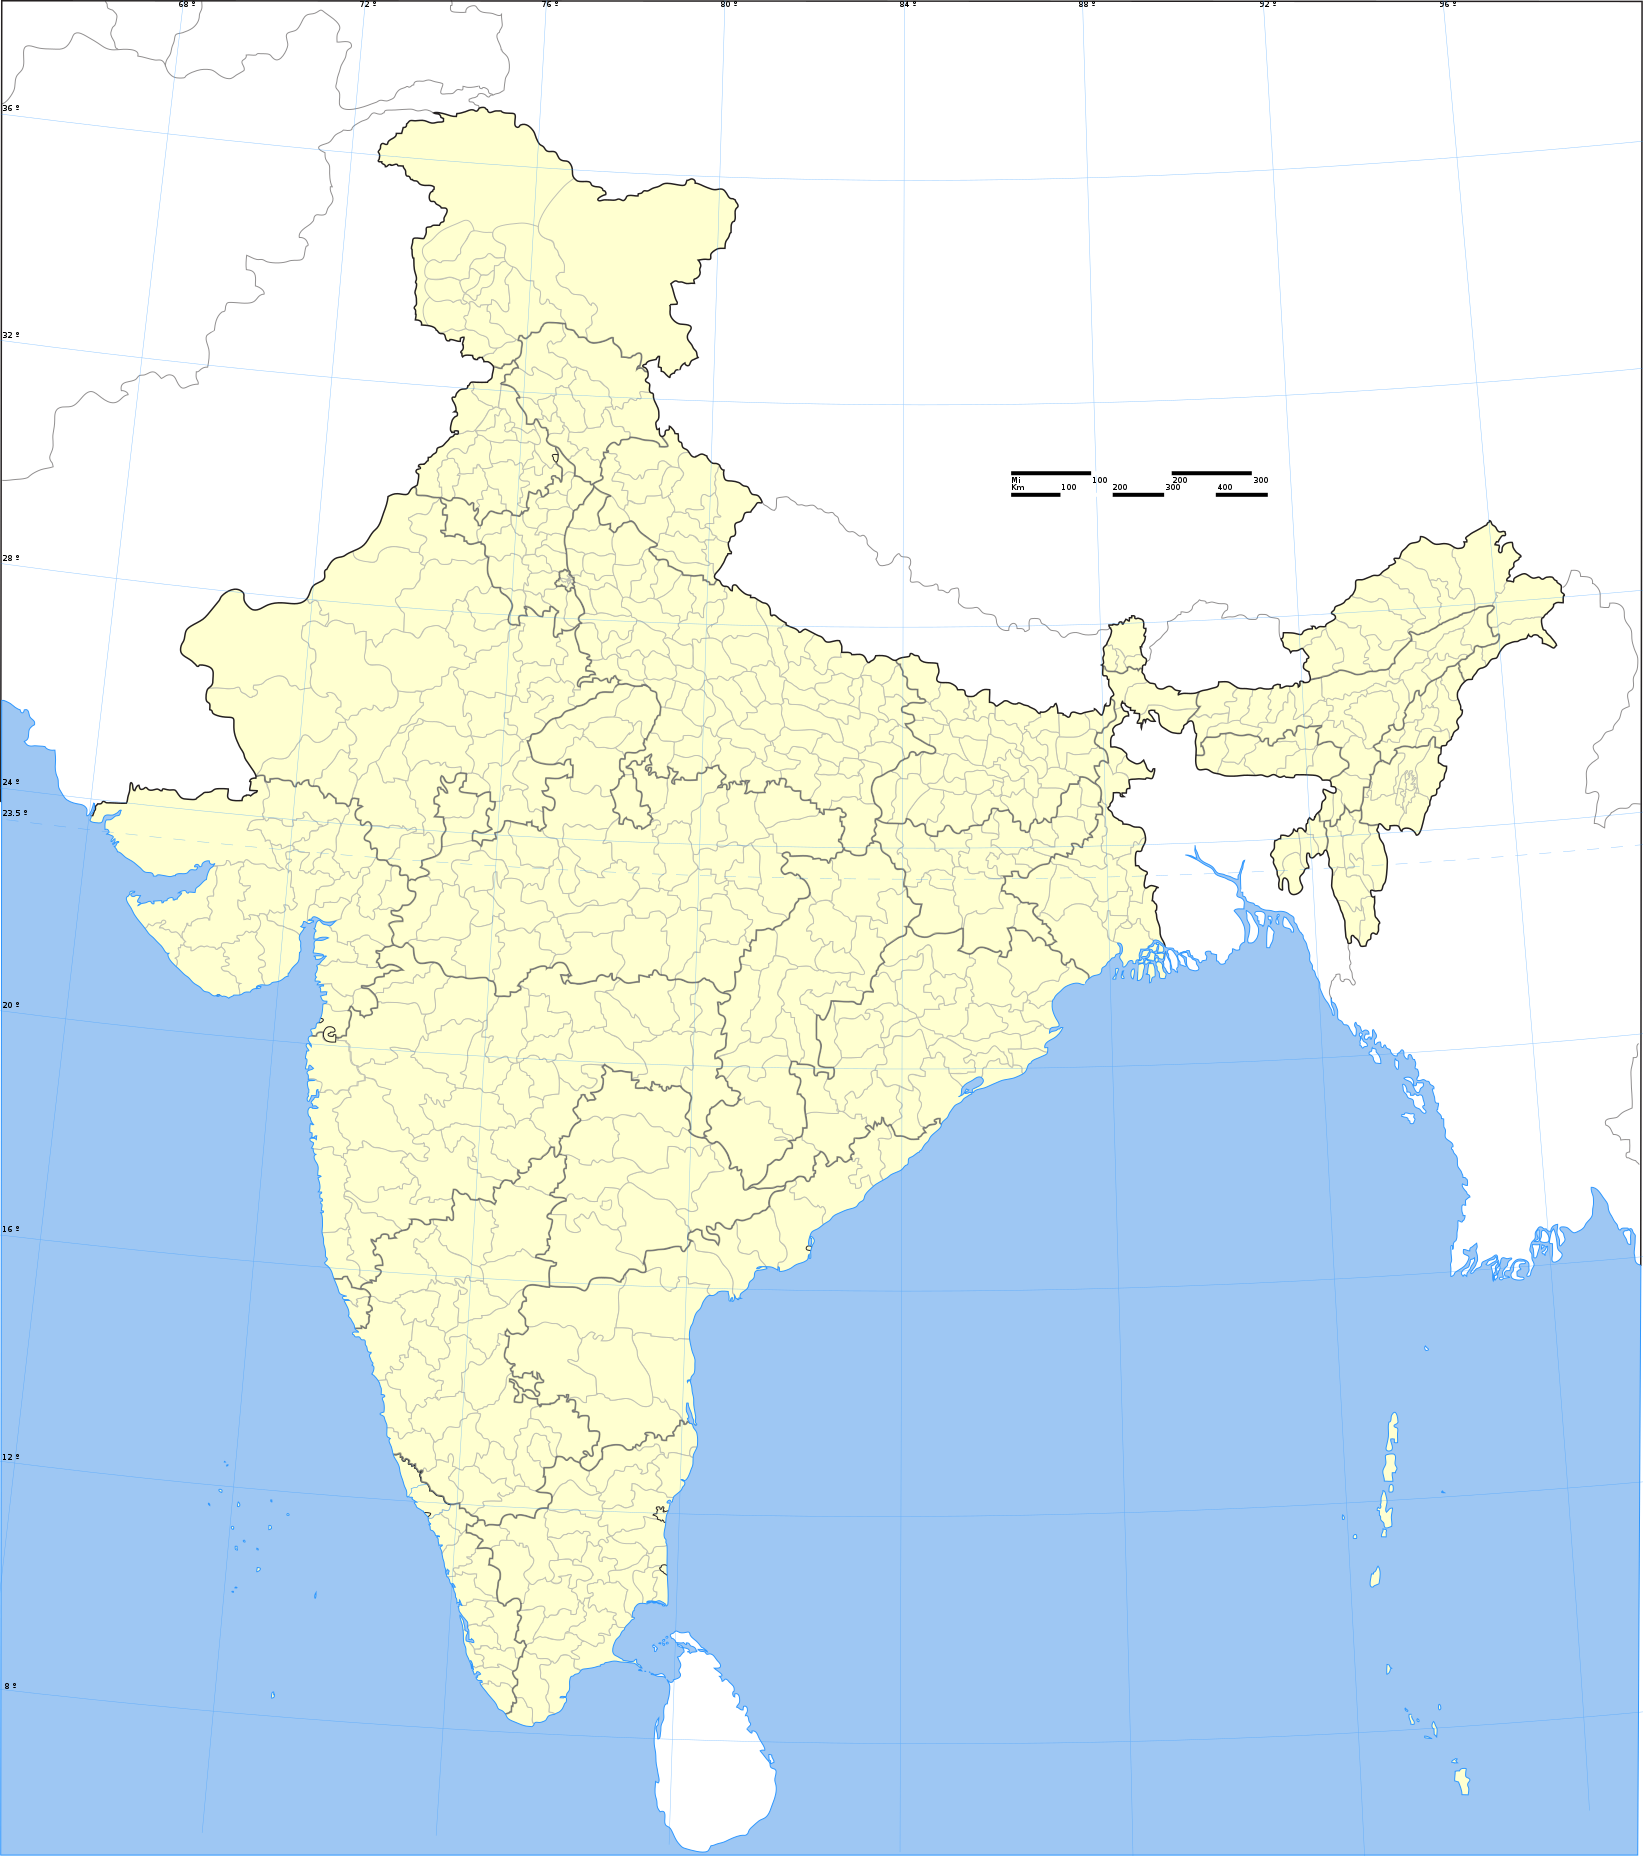 districts of india